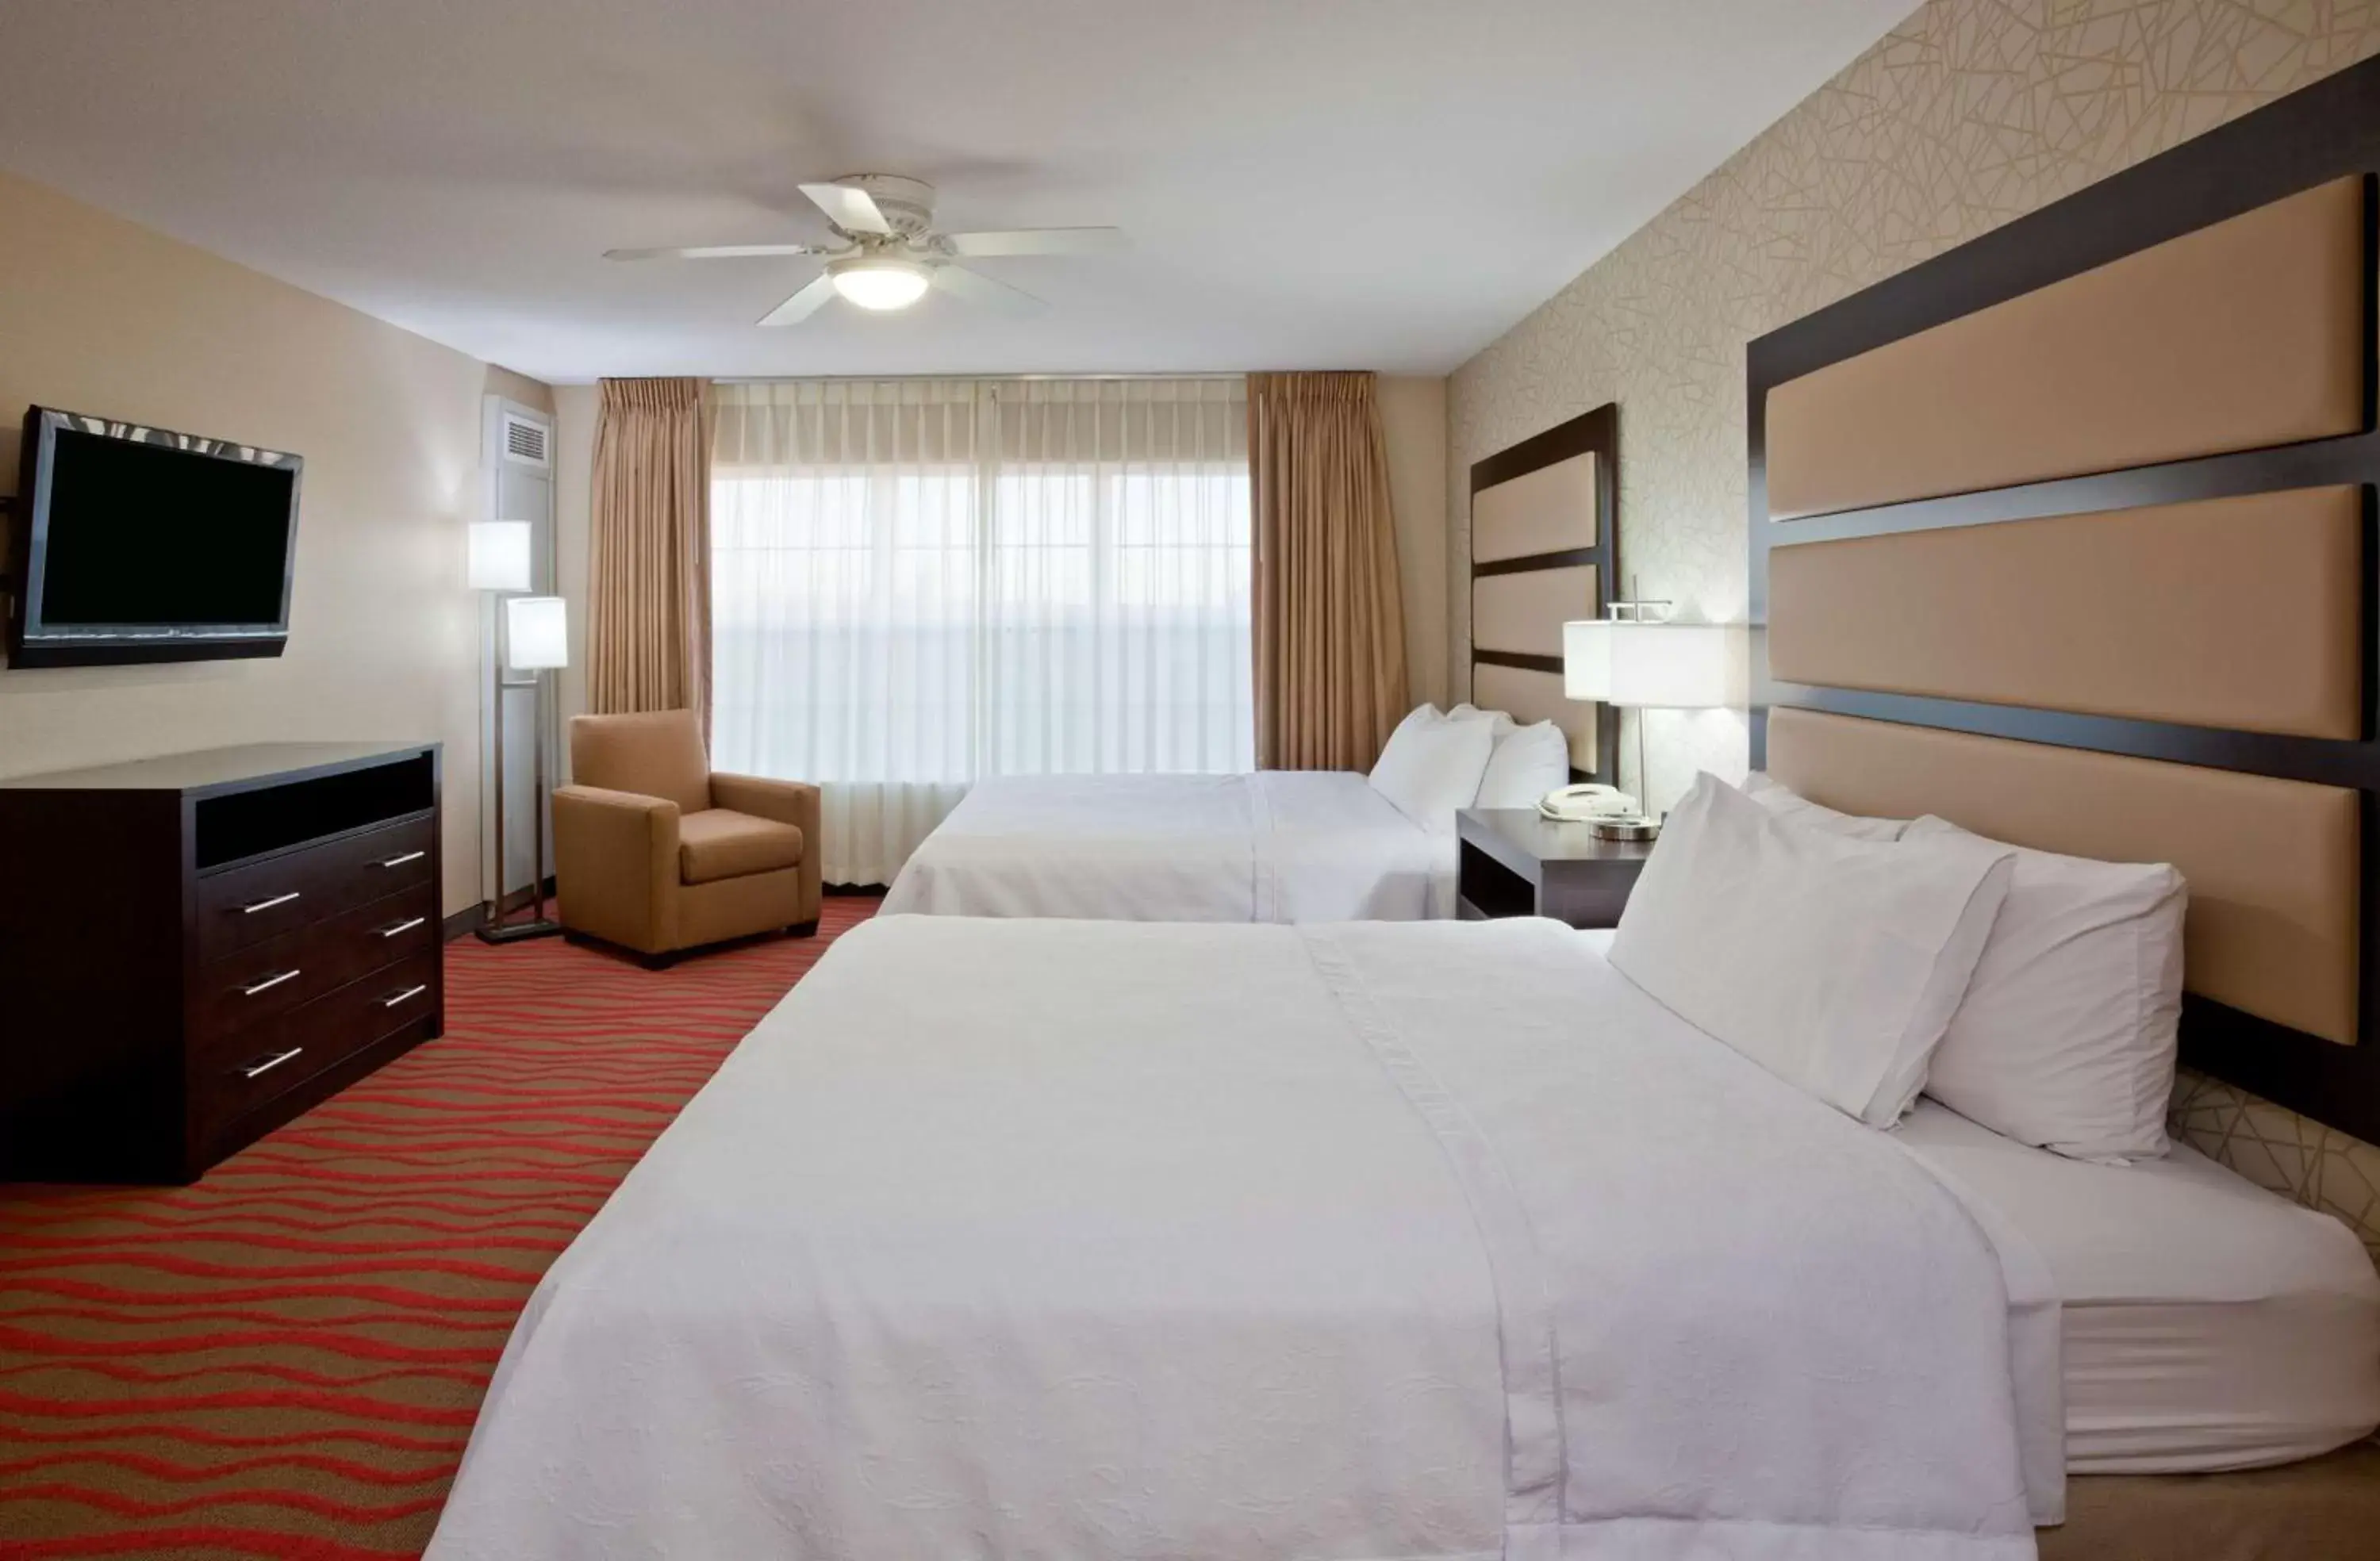 Bedroom in Homewood Suites by Hilton Sioux Falls